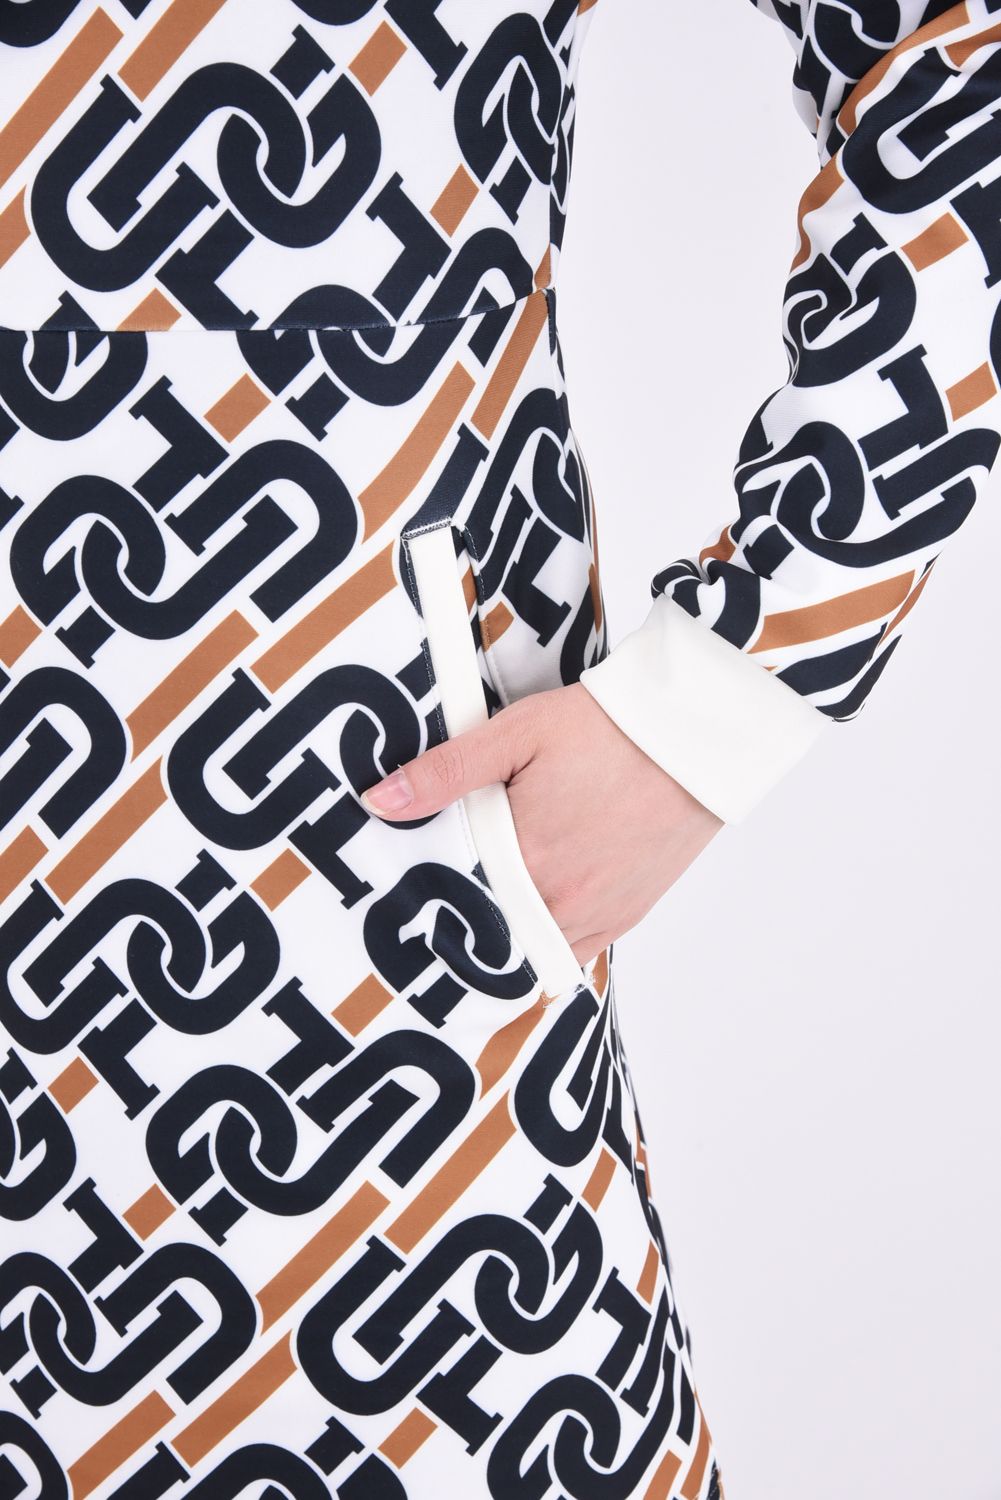 CPG GOLF - 【レディース】 CHAIN LOGO GRAPHICAL ONE PIECE / 2WAY 